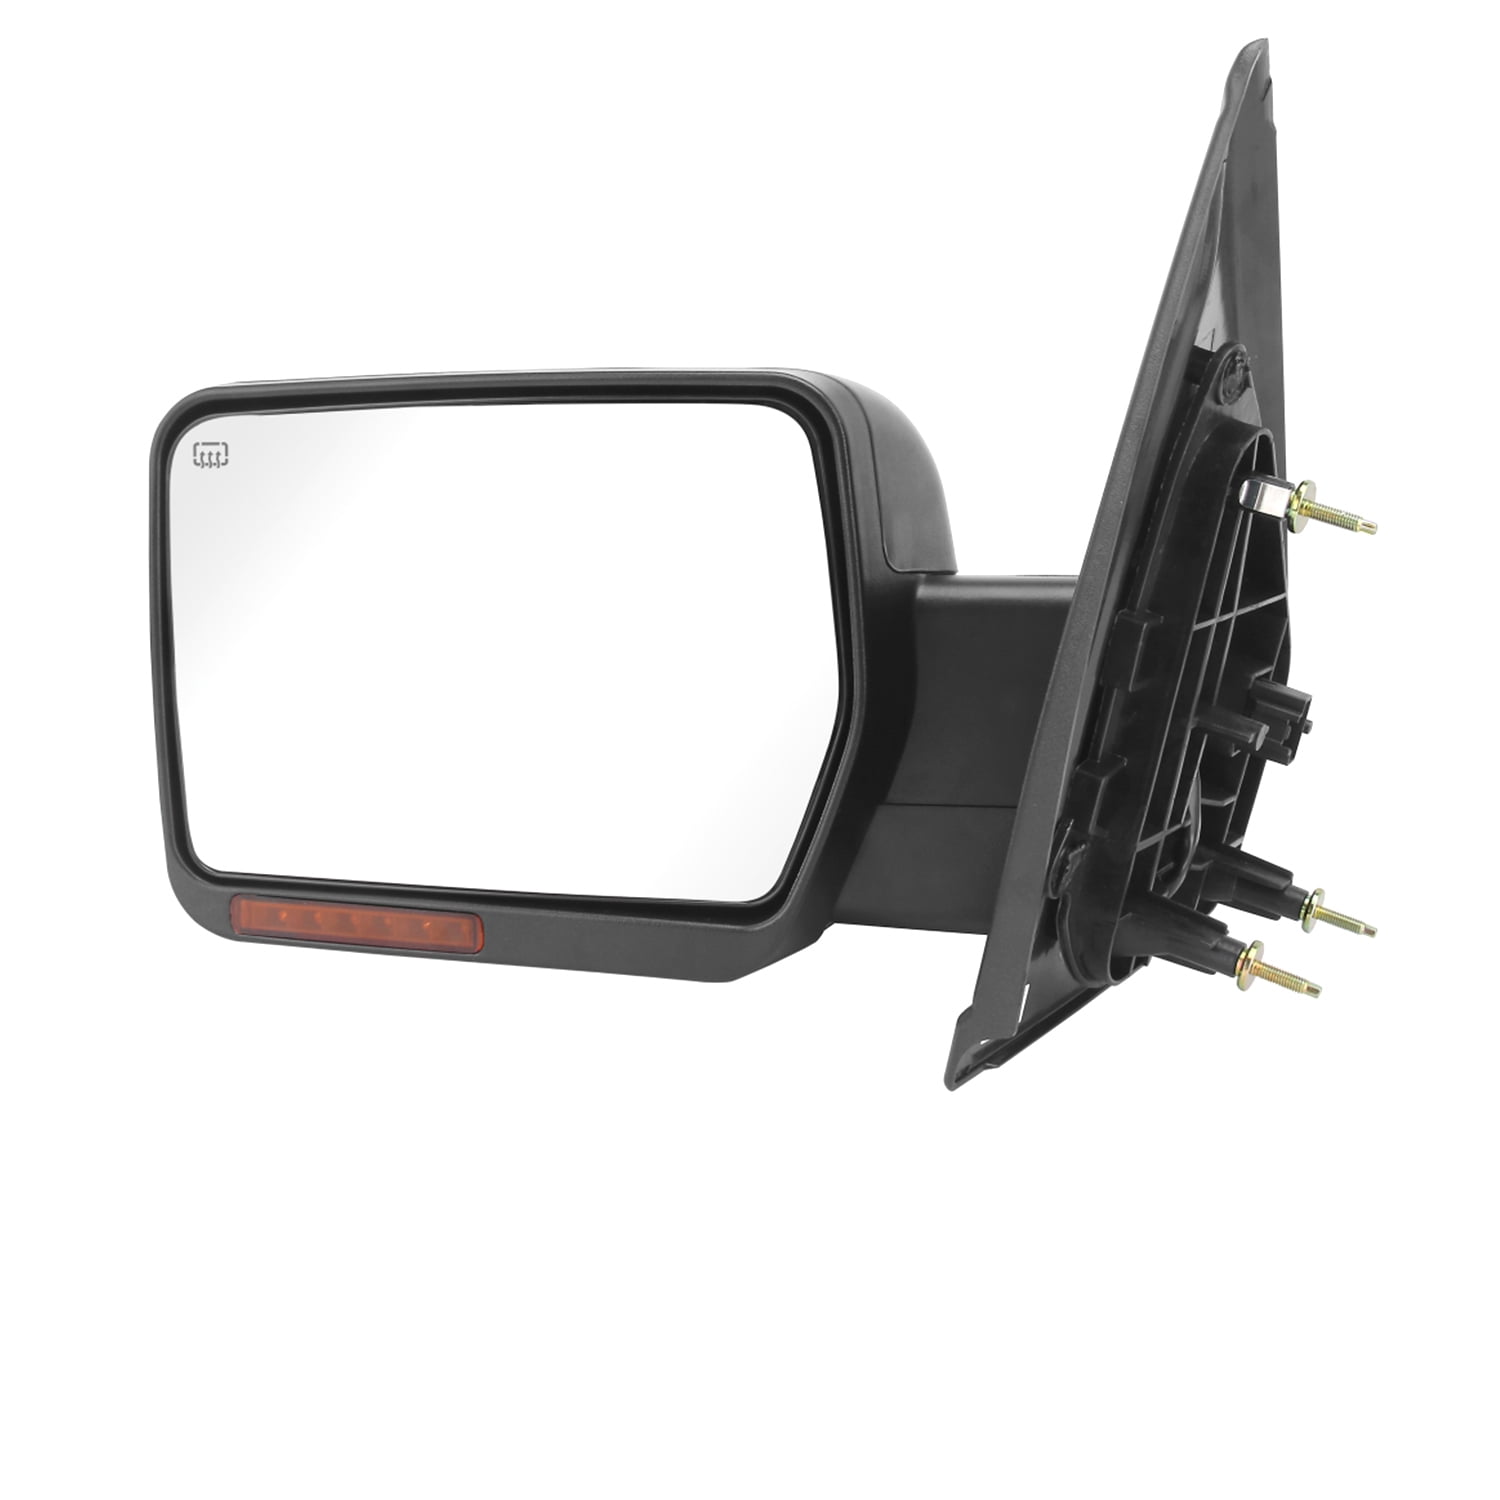 PZ Driver and Passenger Side Tow Mirrors With POWER HEATED,W/AMBER  SIGNAL,Clearance Lamp,CHROME,Replacement Fit for 2007-2014  SILVERADO/SIERRA/Avalanc 外装、ボディパーツ